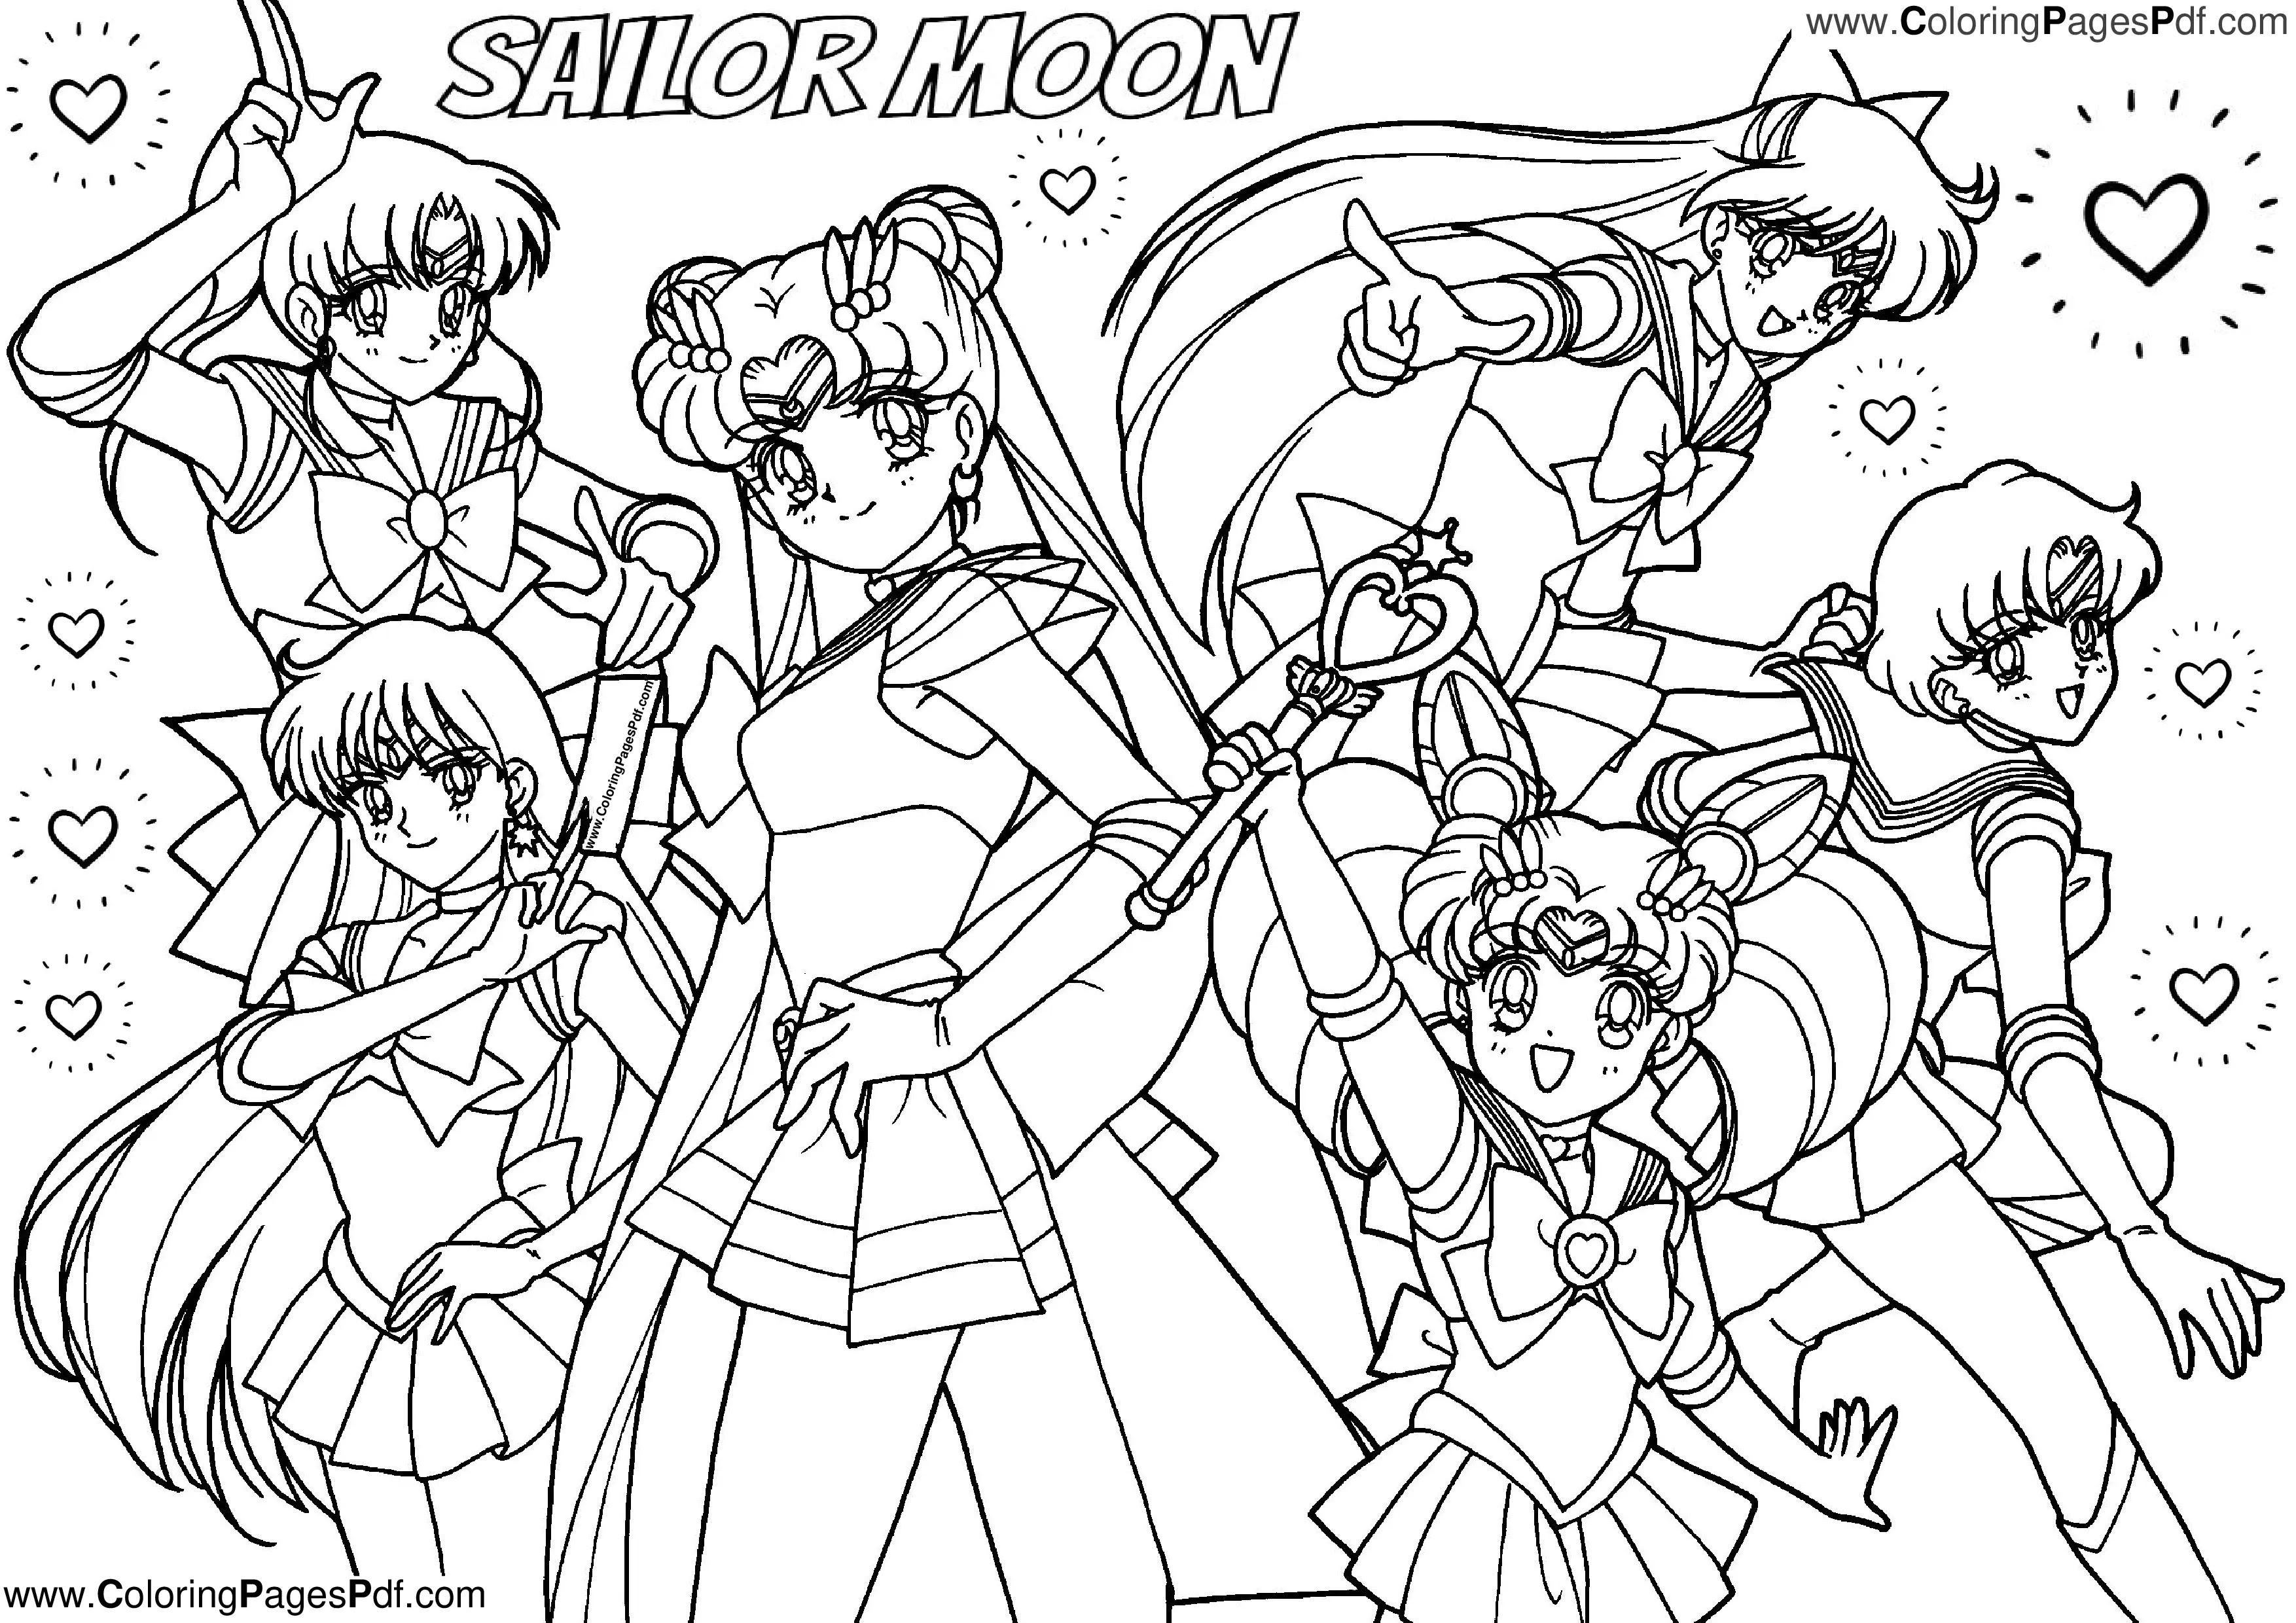 Printable sailor moon coloring pages